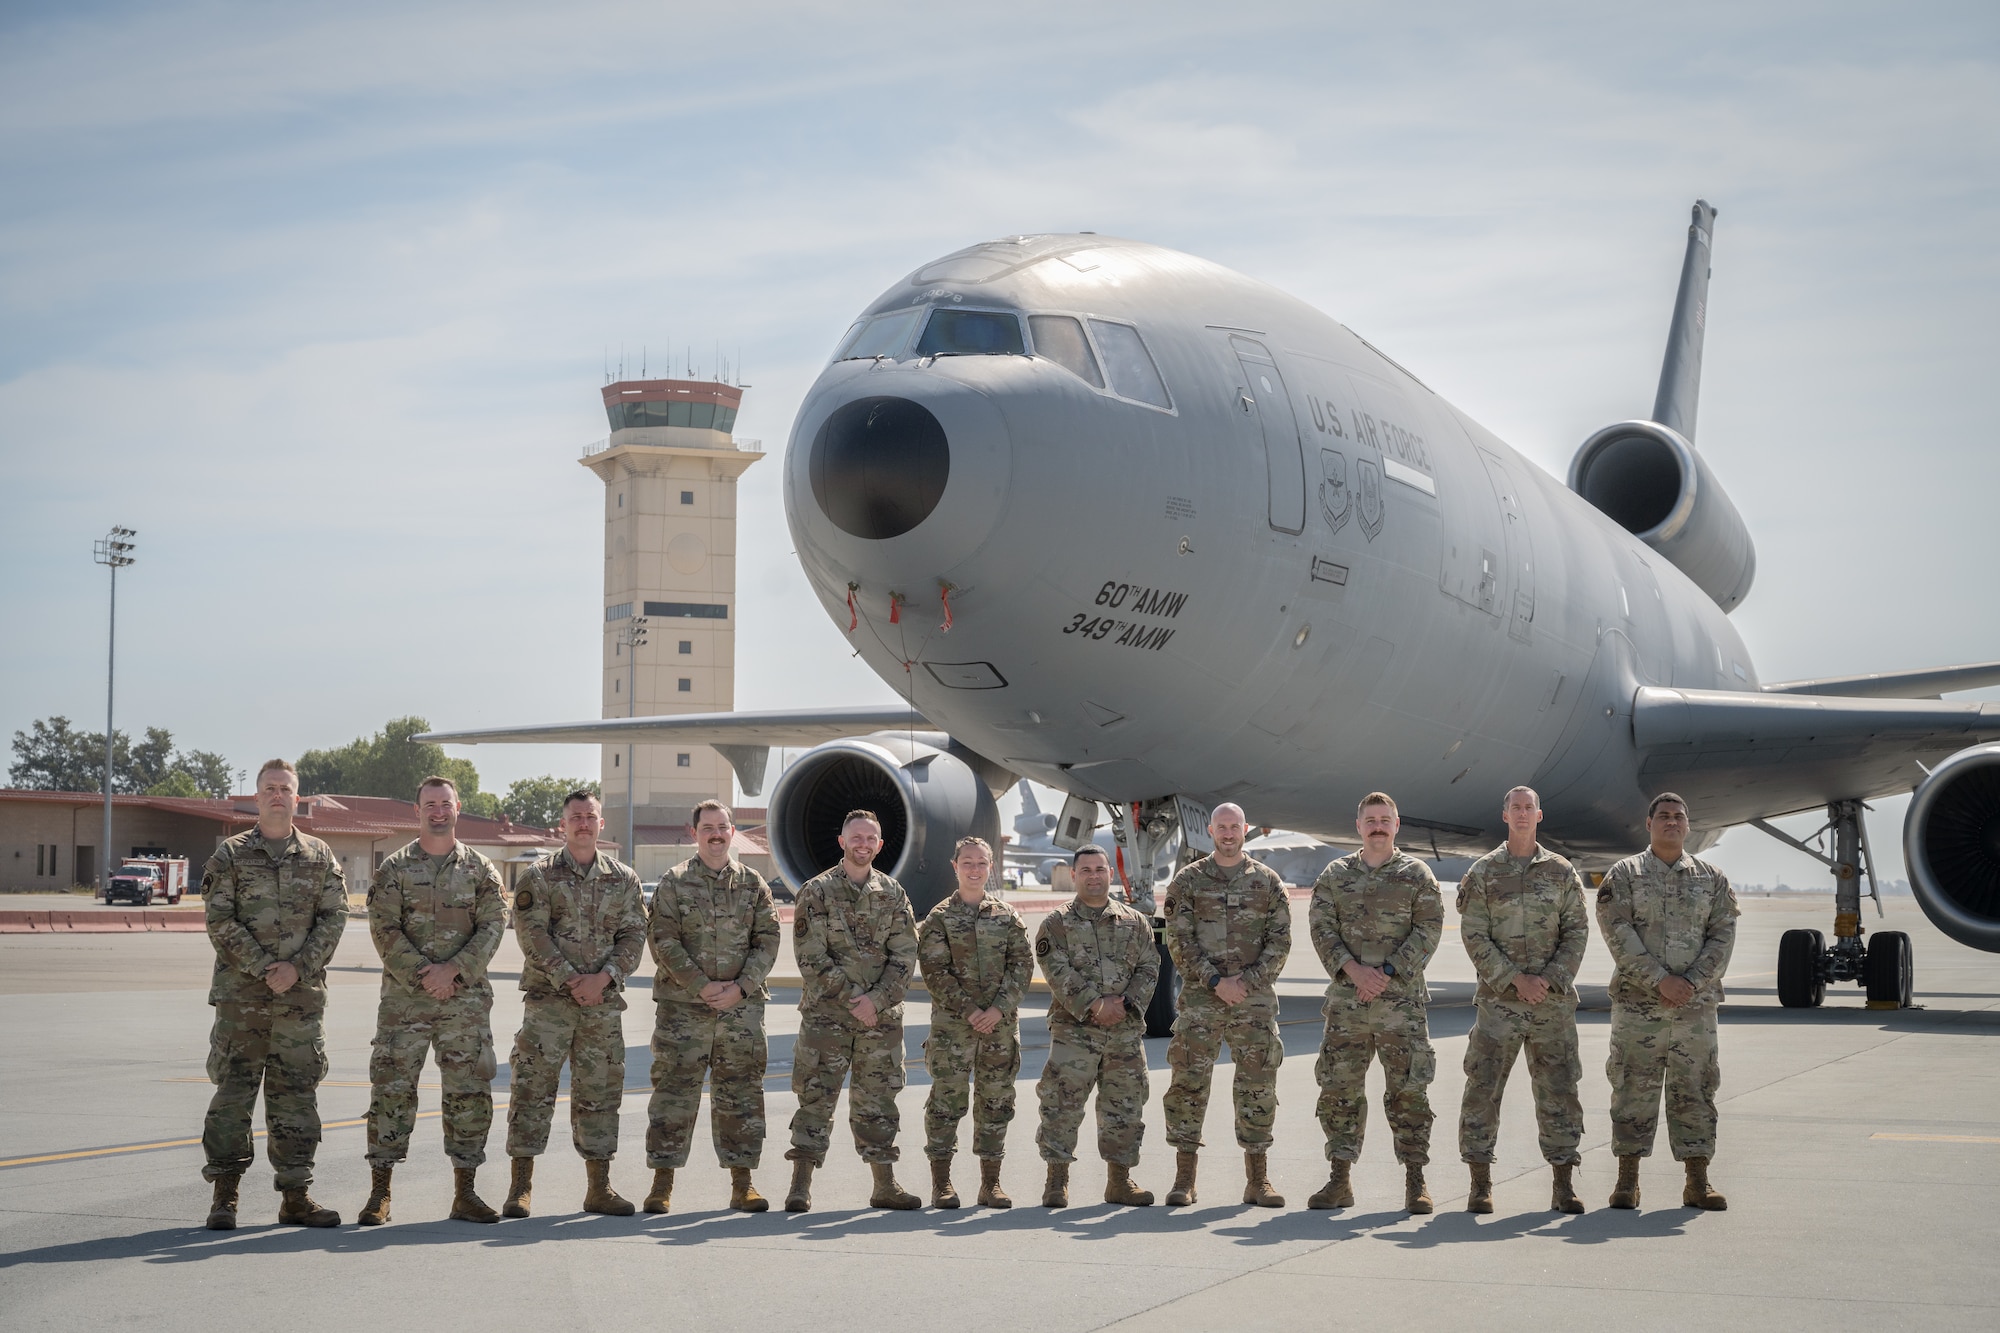 11 Airmen stand in front of a military aircraft for a photo